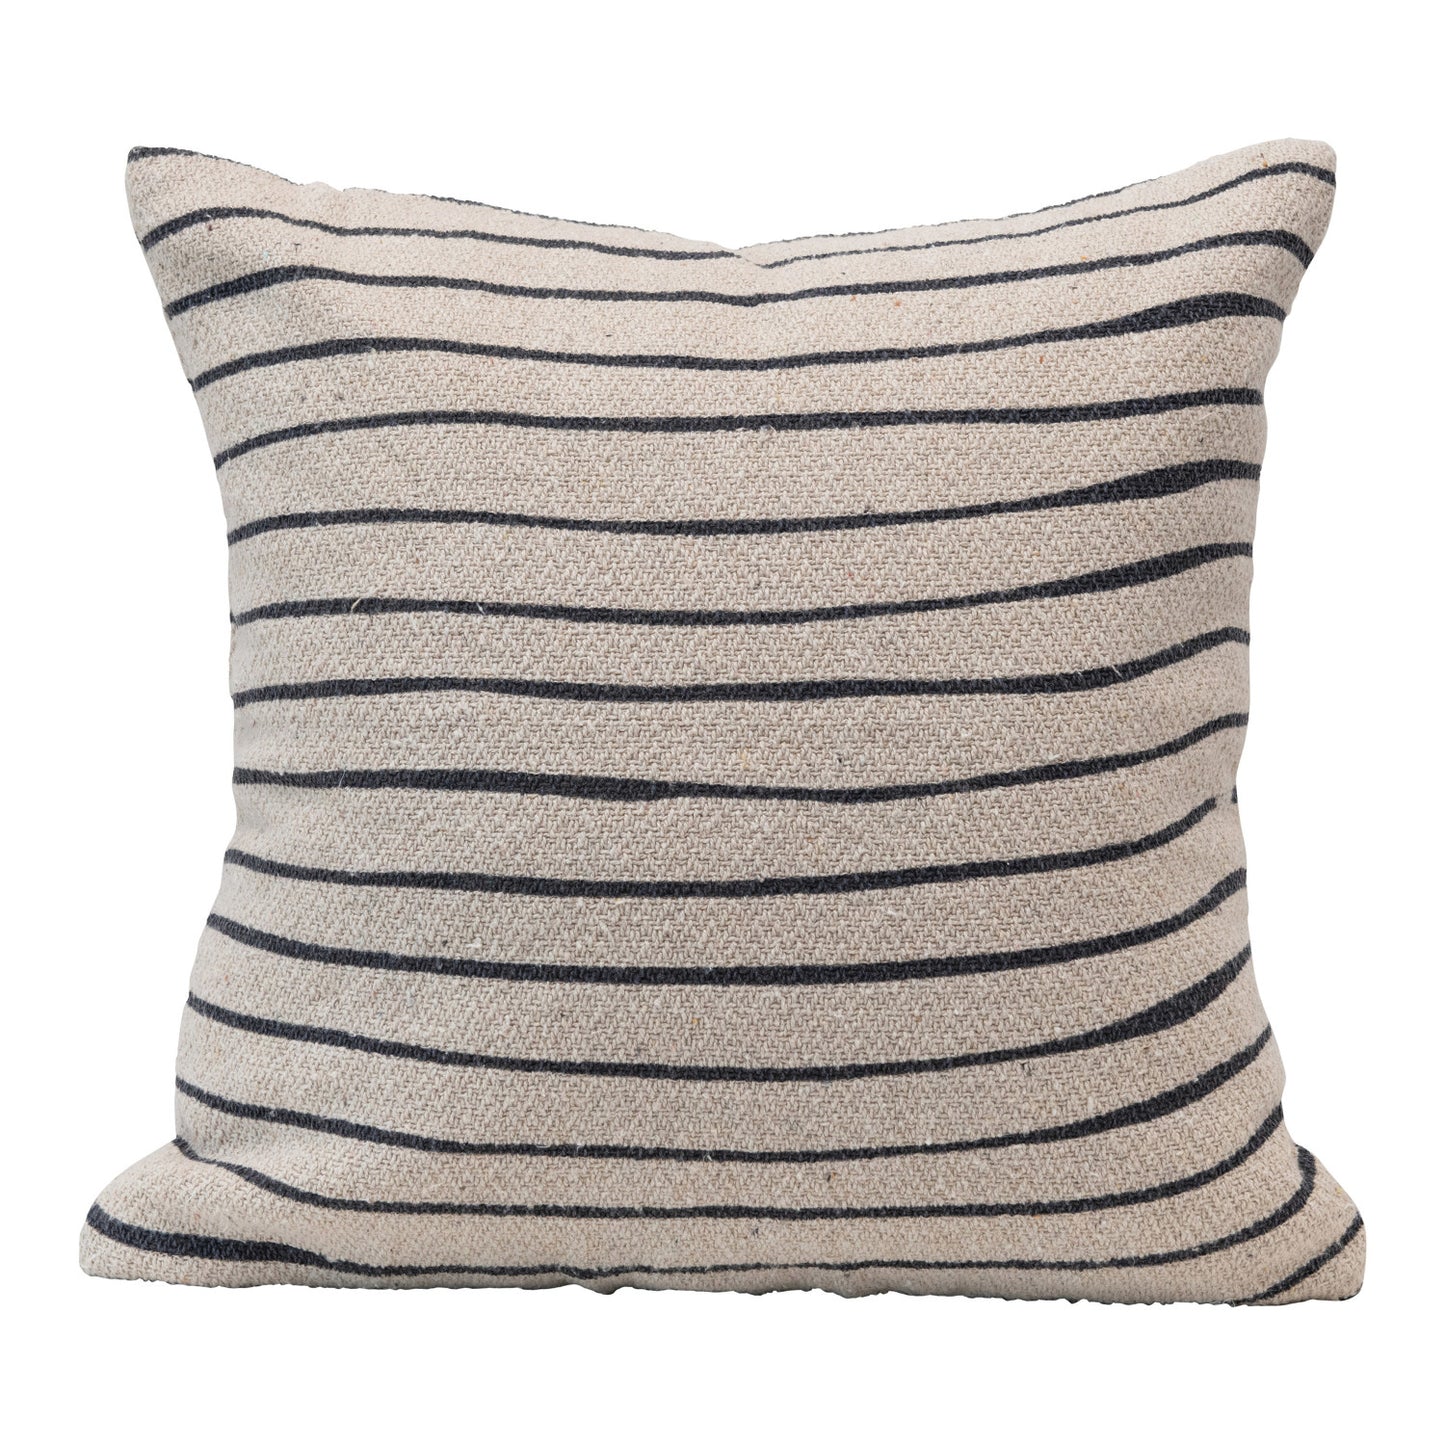 Recycled Cotton Blend Pillow w/ Stripes